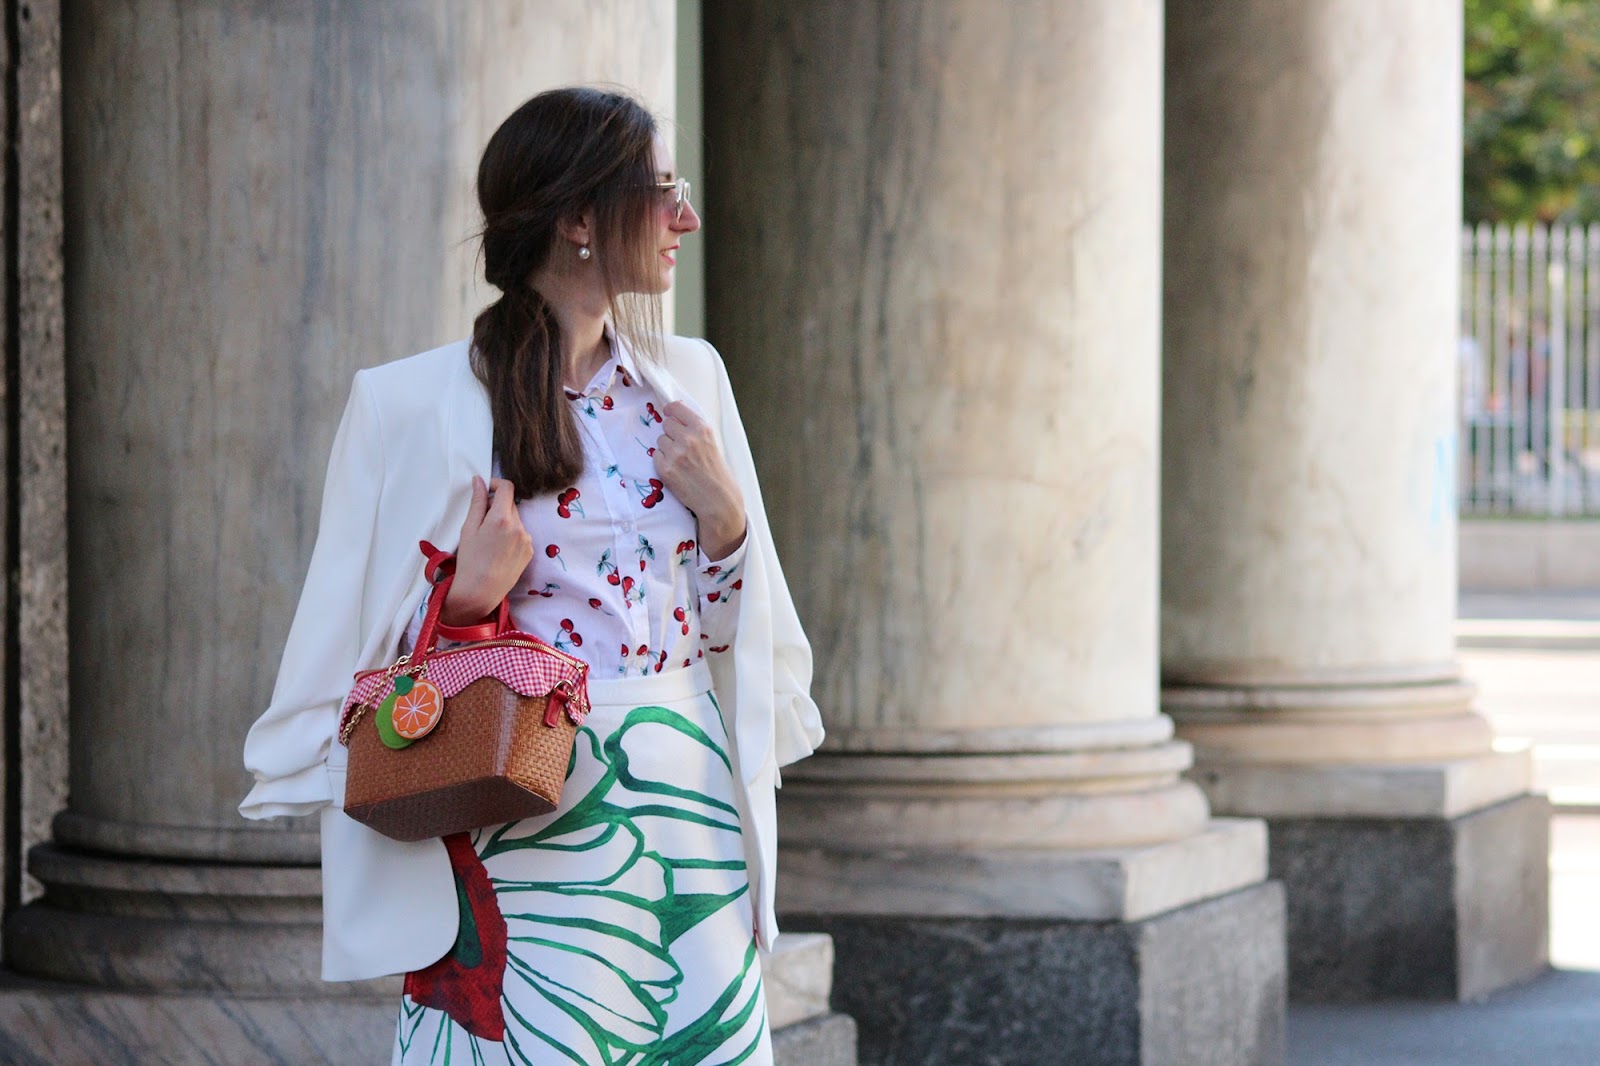 fashion style blogger outfit ootd italian girl italy trend vogue glamour milano fashion week mfw flower skirt accessorize pic nic bag zara blazer red heels hm